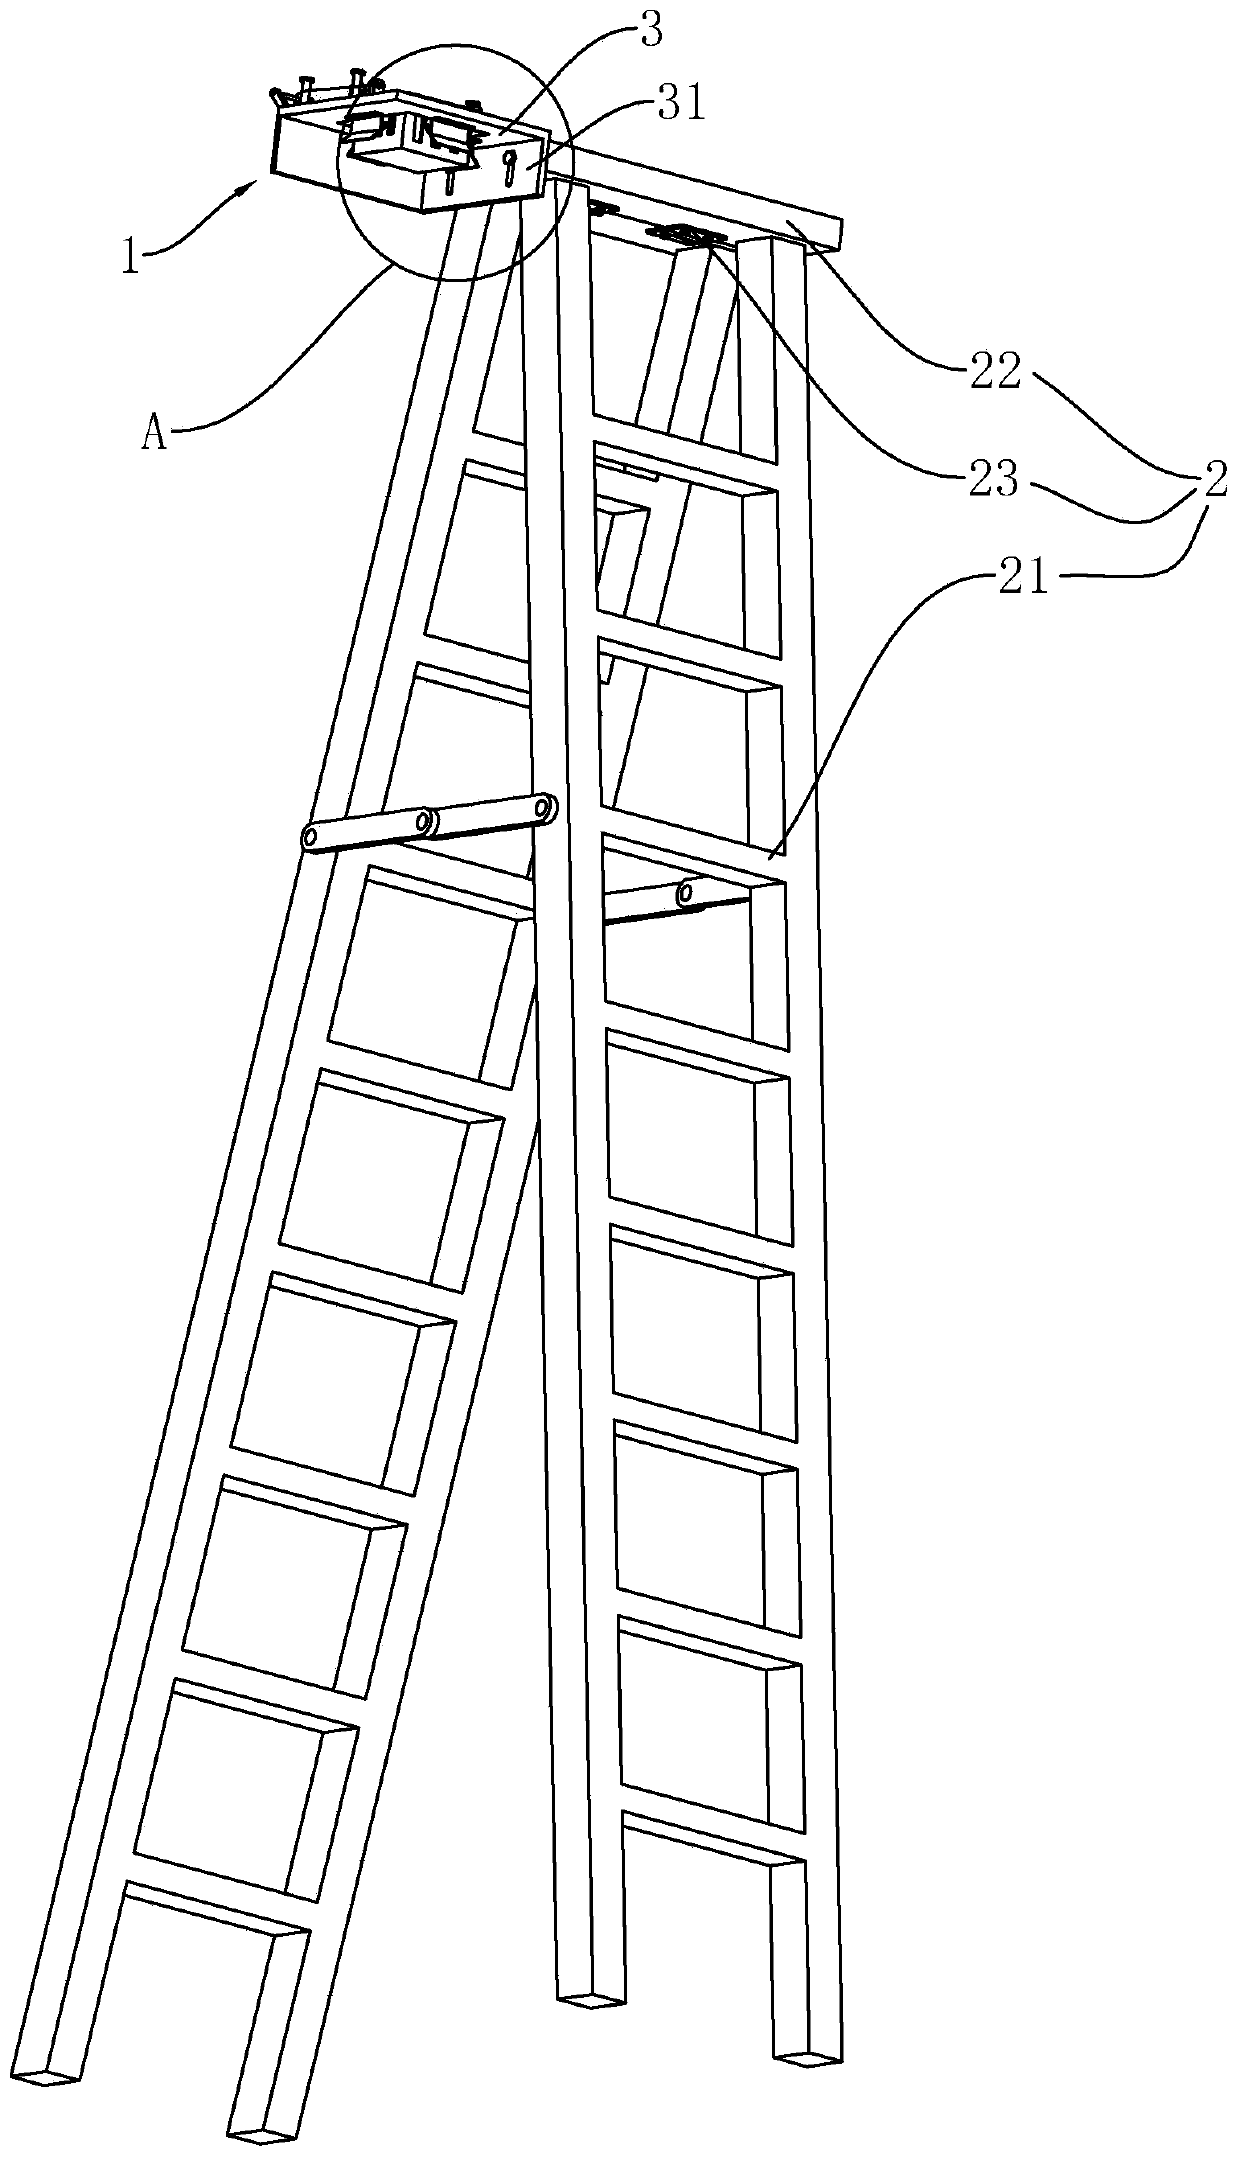 A kind of ladder for house ceiling decoration